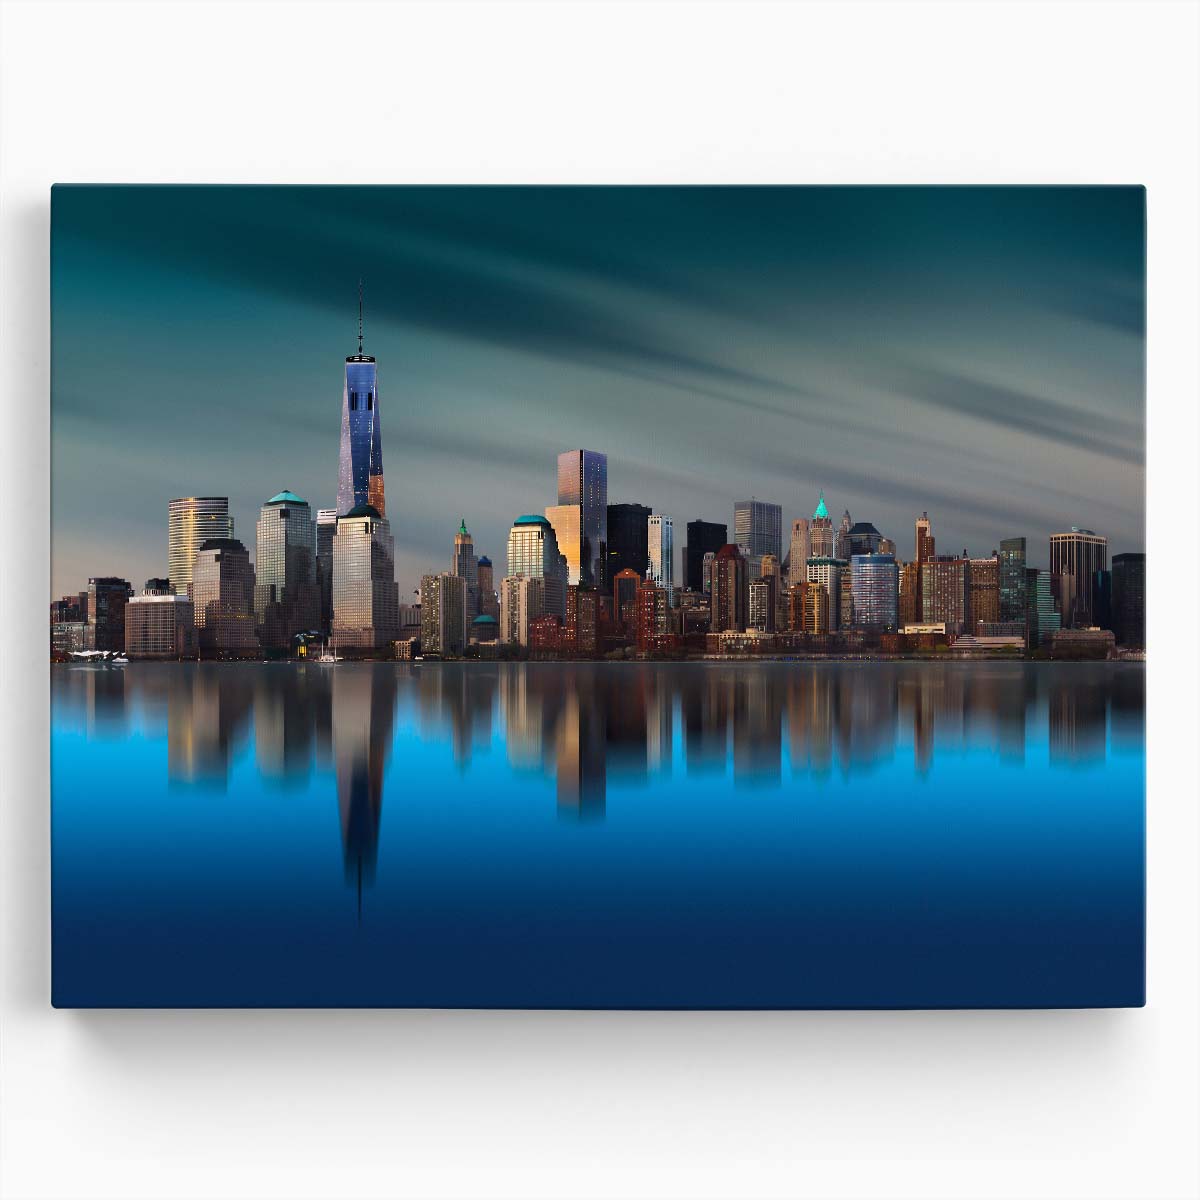 NYC Skyline & World Trade Center Panoramic Wall Art by Luxuriance Designs. Made in USA.